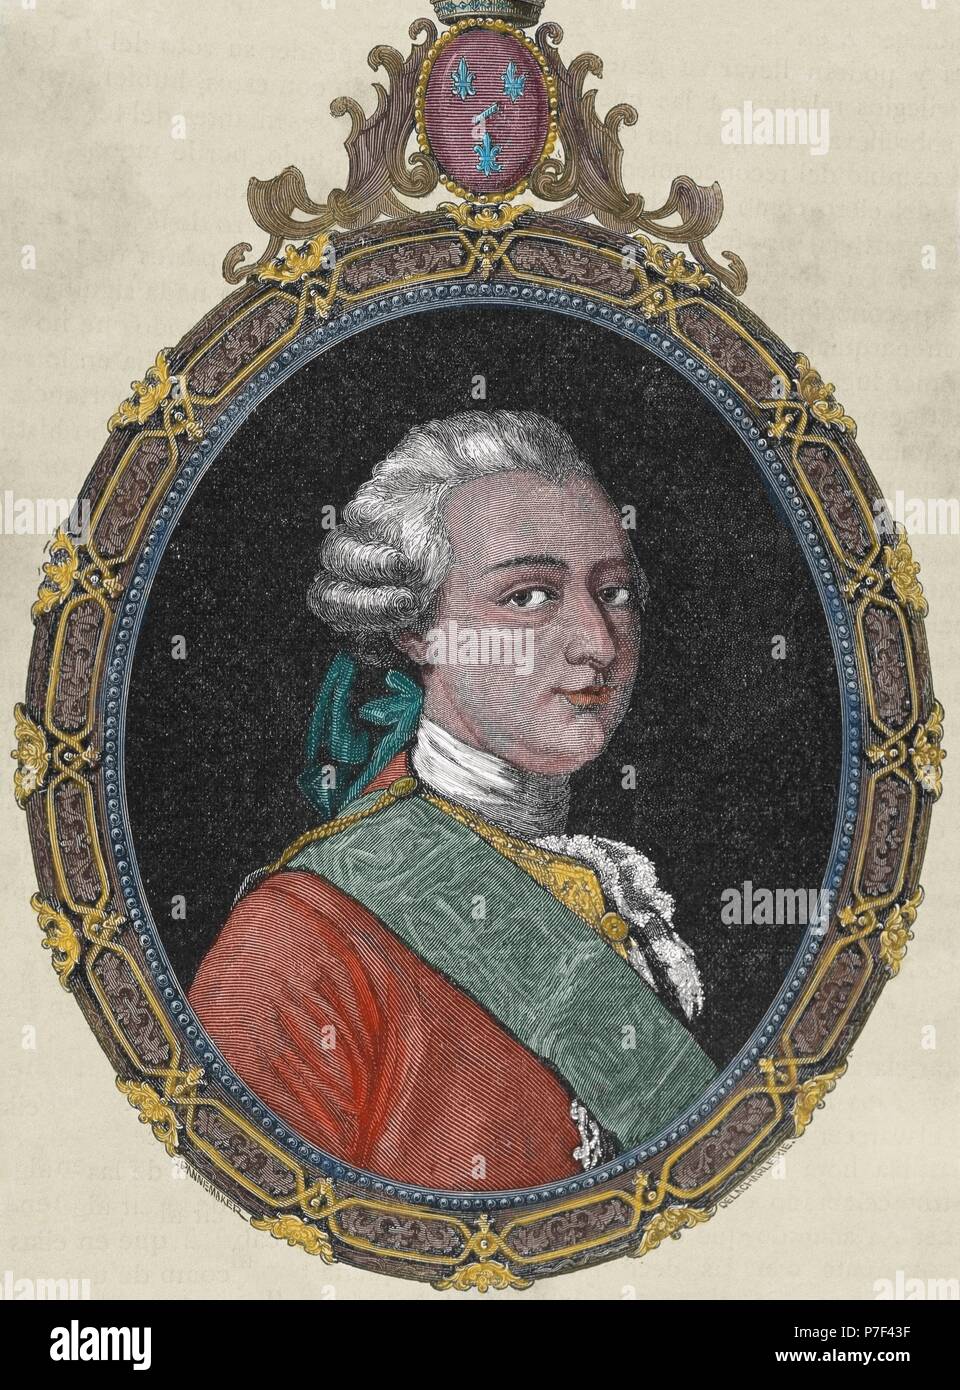 Louis Joseph of Conde (1736-1818). Prince of Conde from 1740-1818. House of Bourbon. Portrait. Engraving, 19th century. Colored. Stock Photo